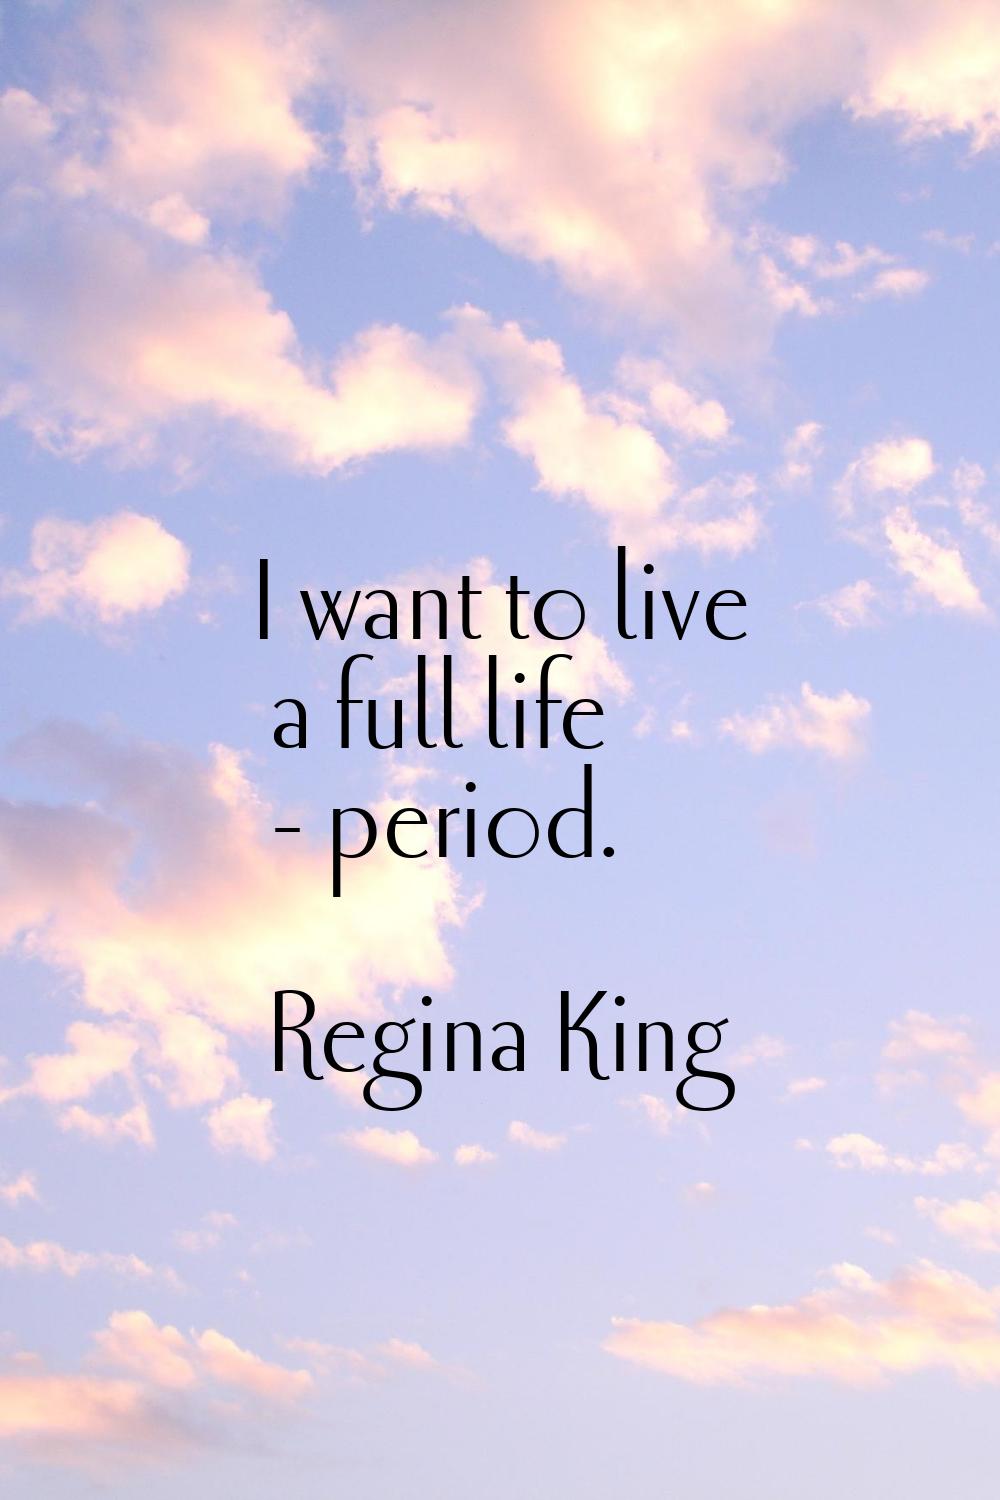 I want to live a full life - period.